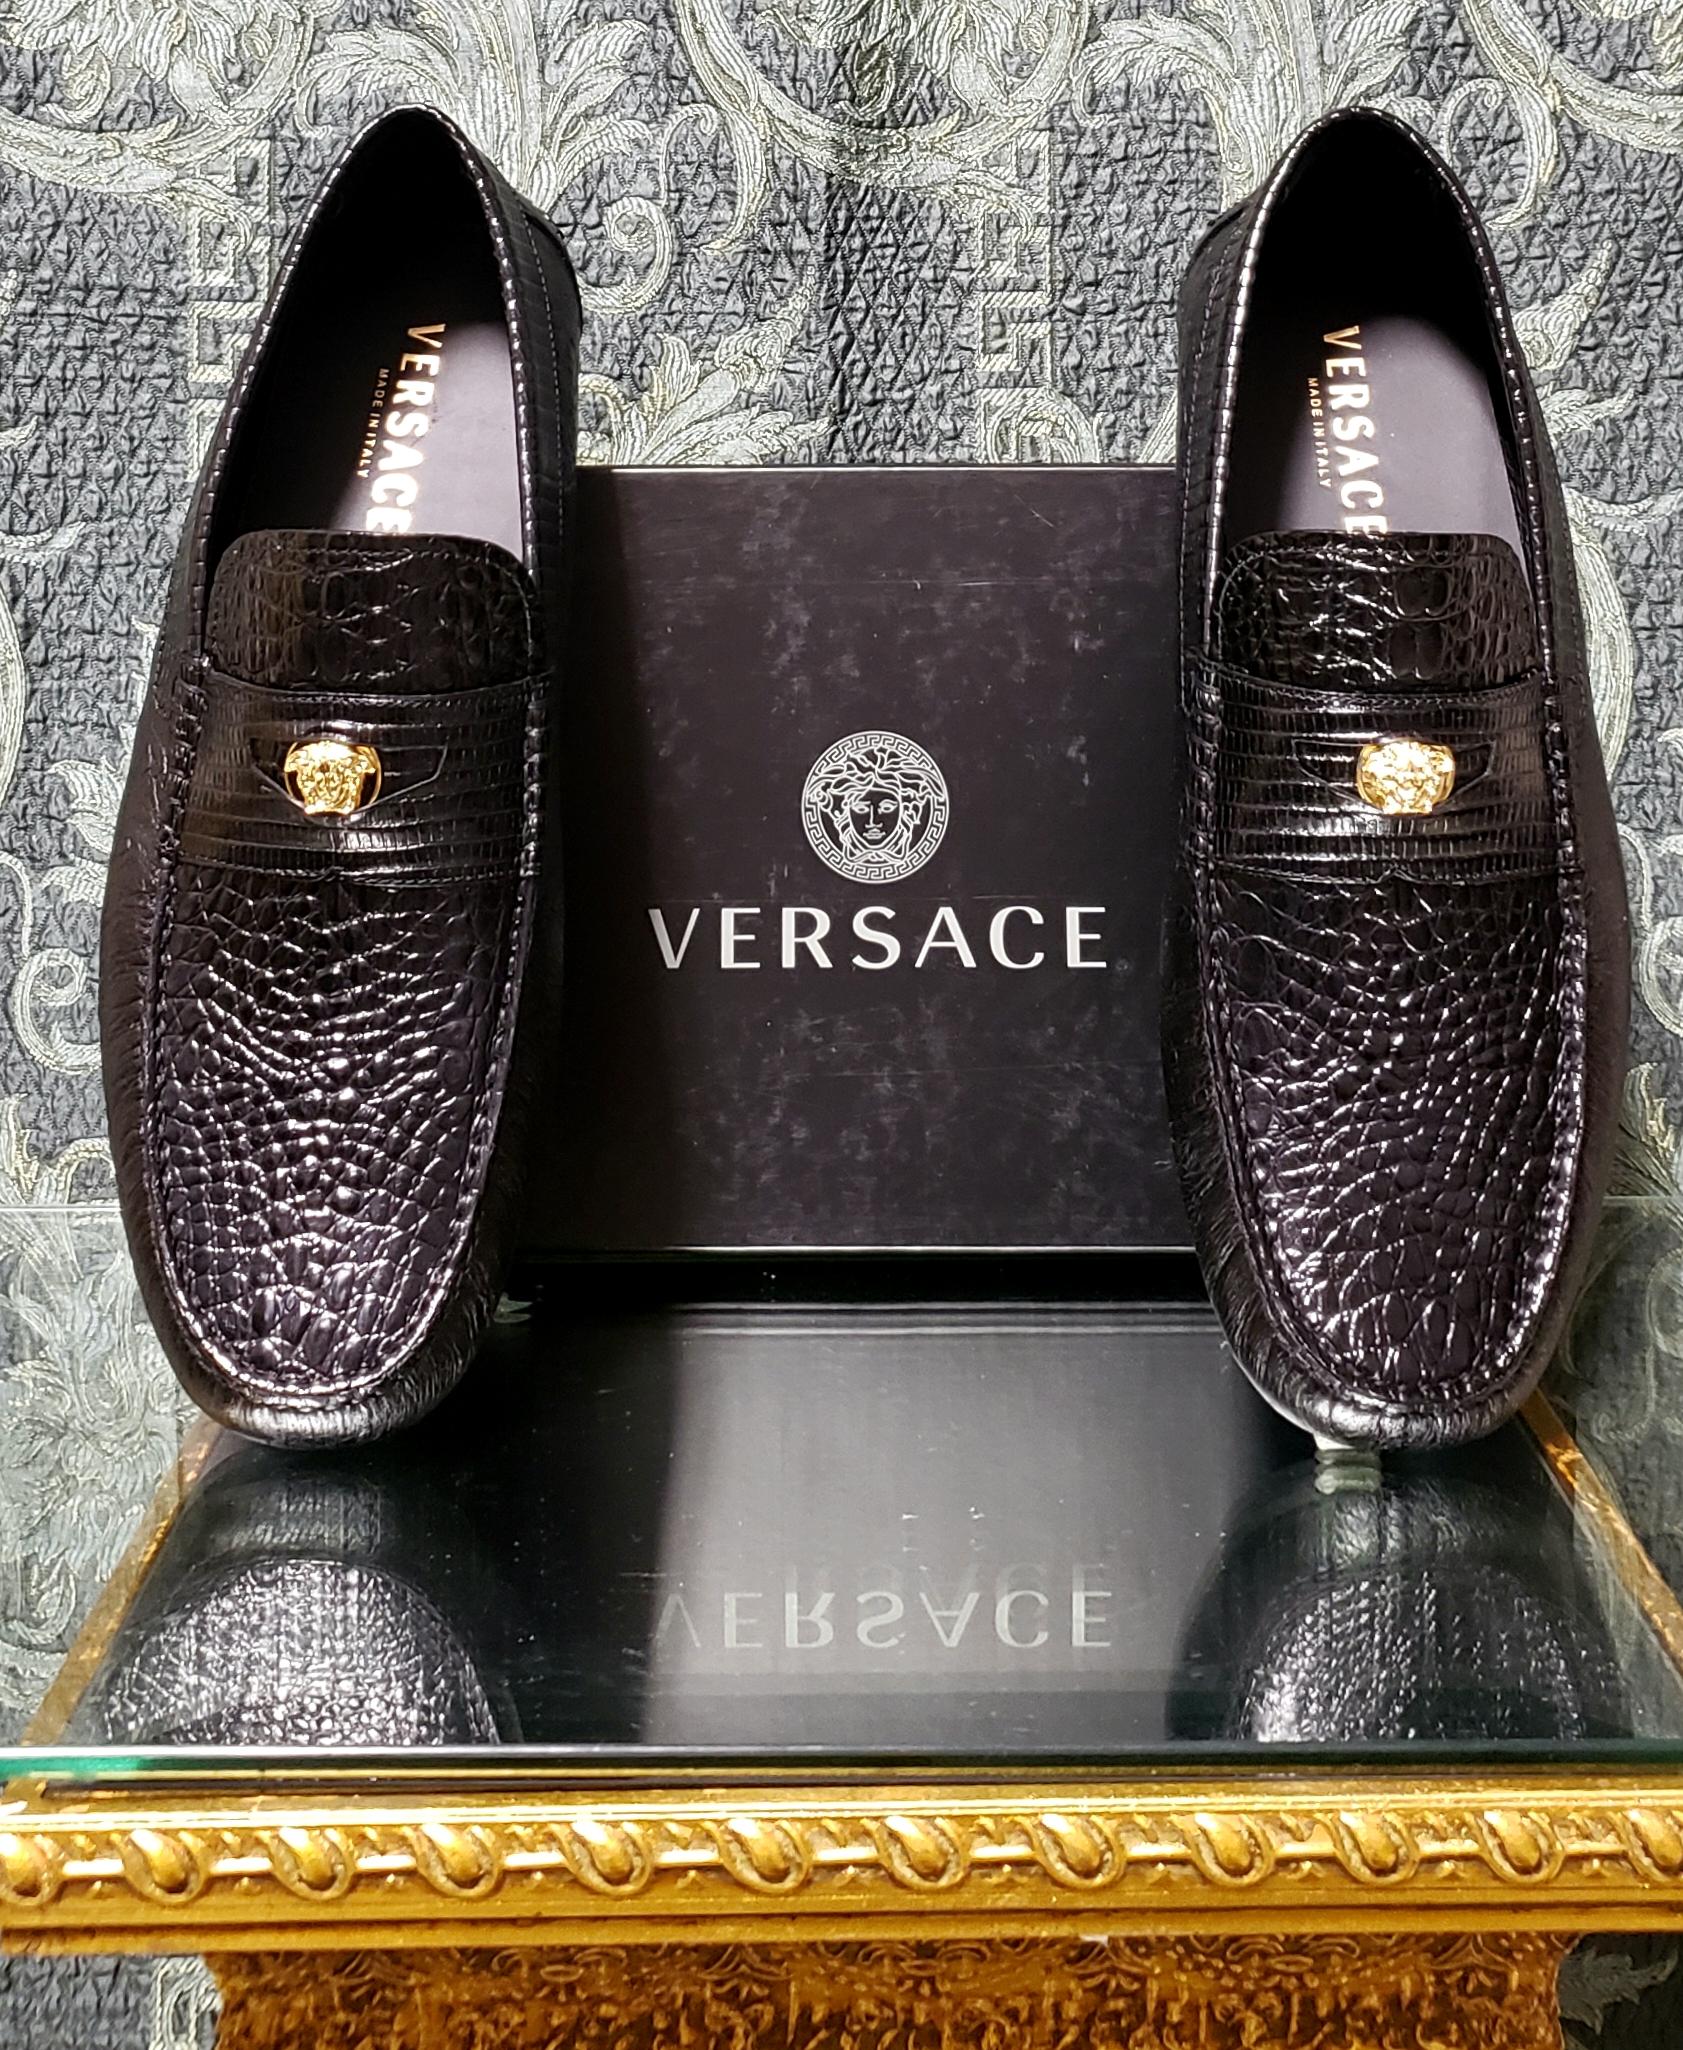 VERSACE

City Shoe

Both casual and chic, these loafers are a great alternative to sneakers when off-duty.
      
Rubber sole loafers

Signature gold-tone buckle with Medusa



Lining: 100% leather

Made in Italy

 Italian Size is 46 - US 13 insole: